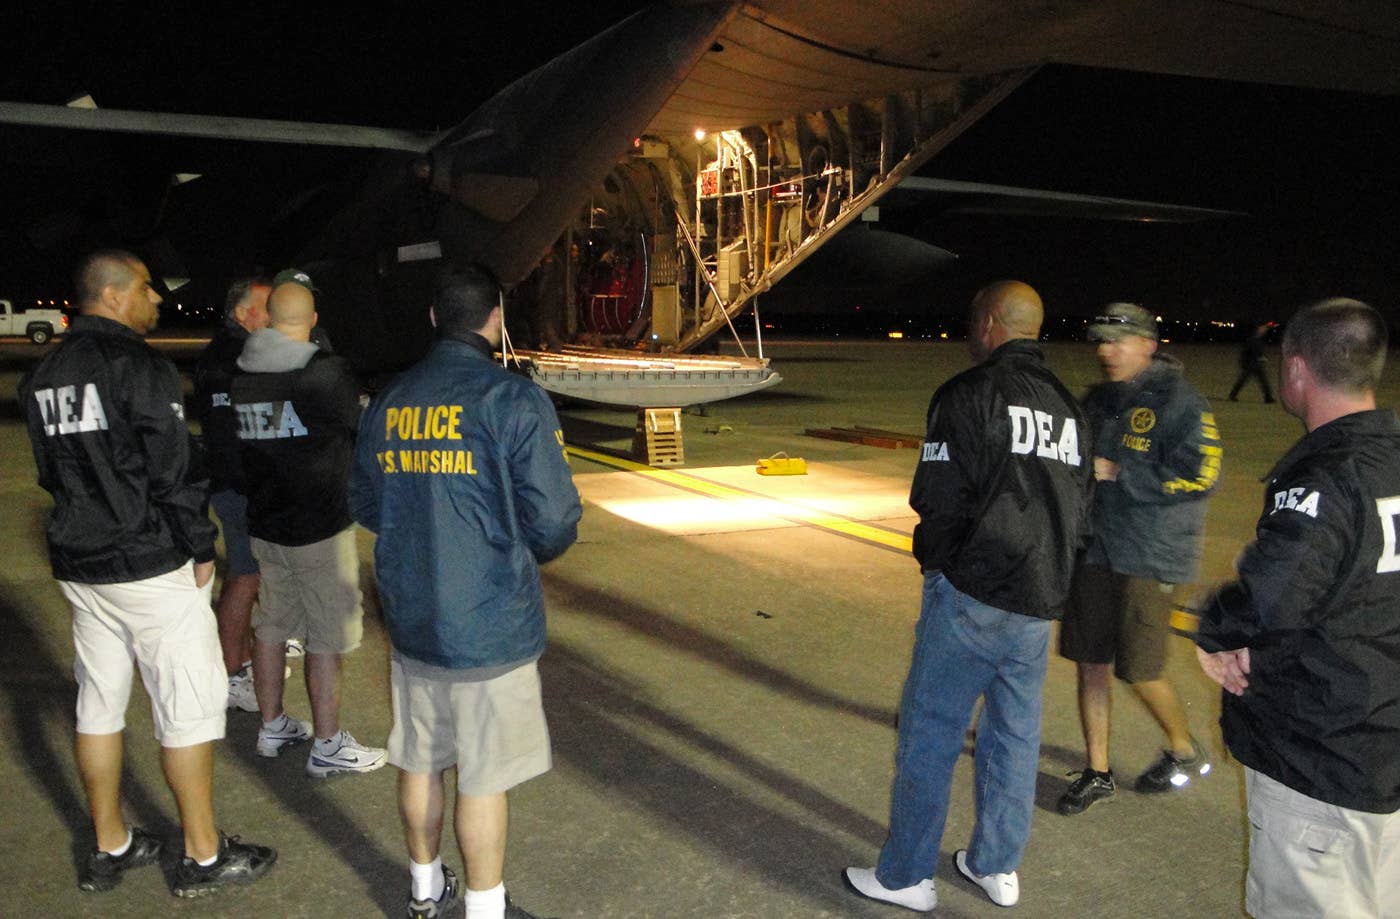 Agents from the U.S. Department of Justice's Drug Enforcement Agency, U.S. Marshall's office and the DOJ's Criminal Division await the offloading of several pallets of seized gold, silver and jewels April 9 in Austin, Texas. The seize assets were part of a joint Panama-U.S. investigation into an international drug money laundering scheme in the Central American country. The Air Force Reserve's 302nd Airlift Wing was charged with flying the seized precious metals and jewels back to the United States from Panama for further processing by Department of Justice agencies. (Courtesy photo/Drug Enforcement Agency)